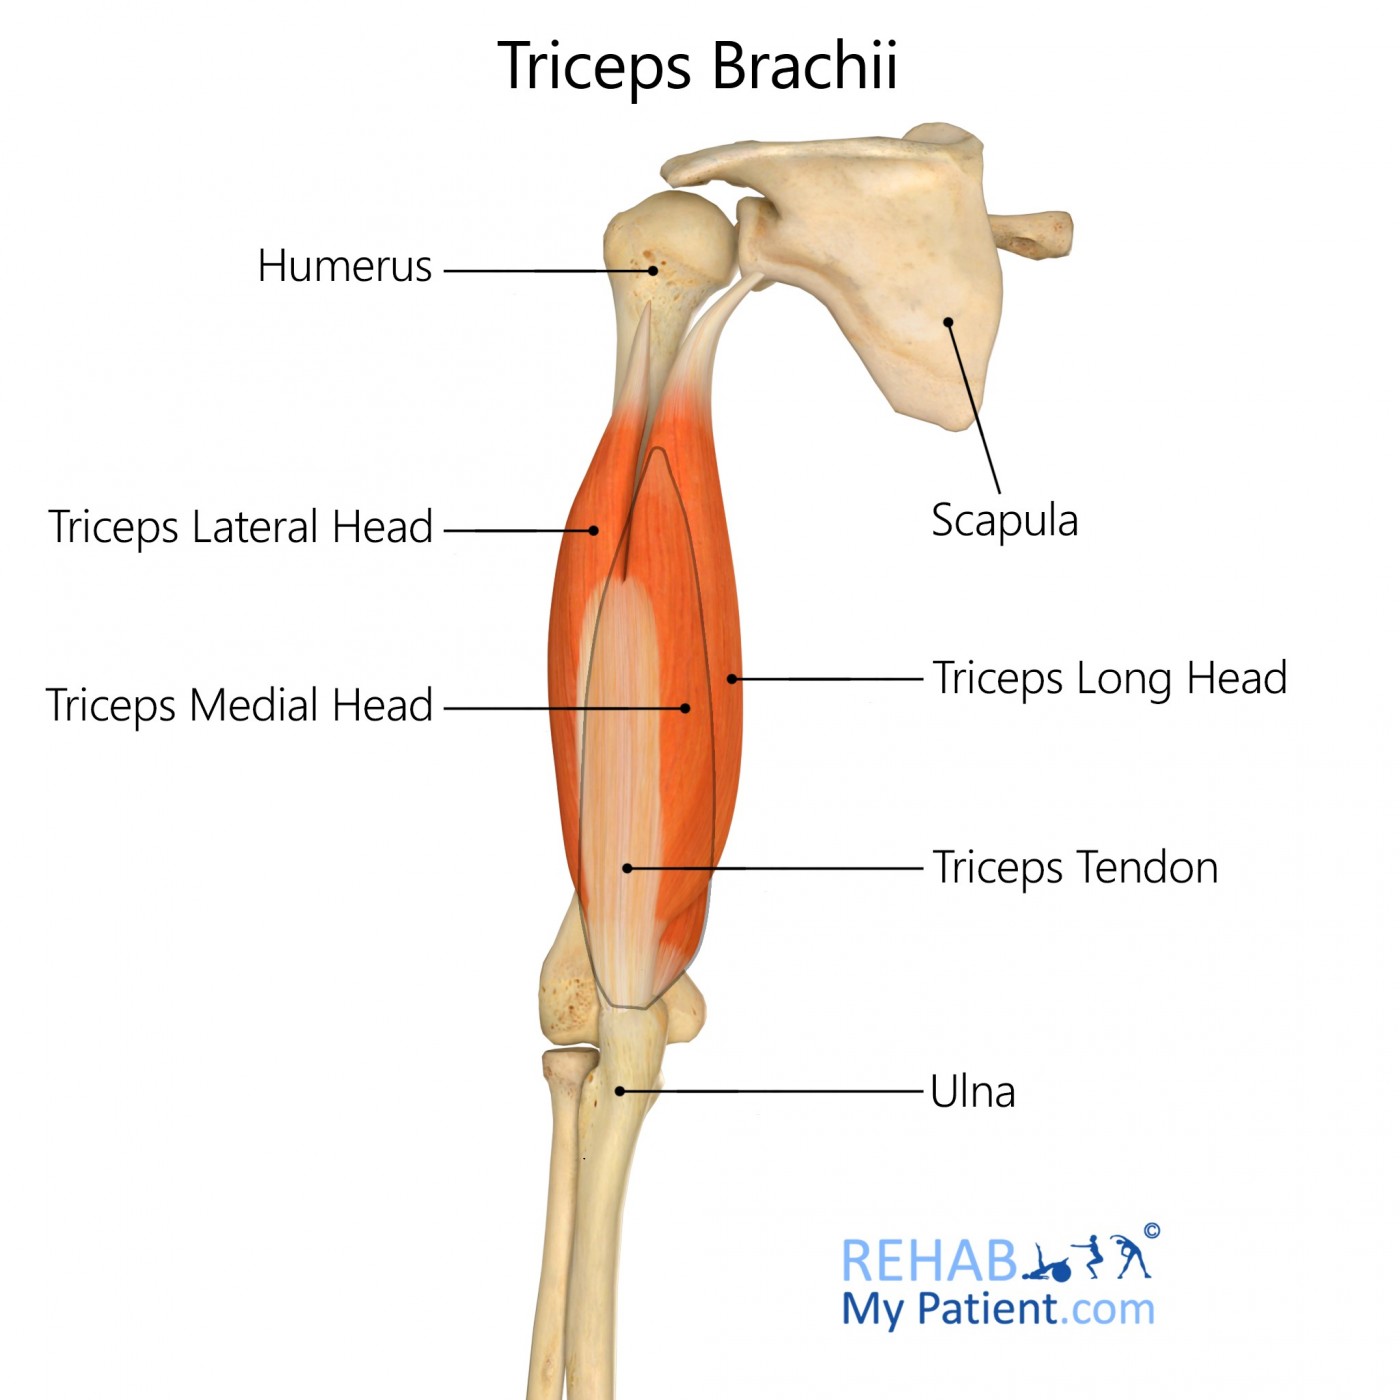 Triceps Brachii 101: A Complete Anatomy Guide to Your Three-headed